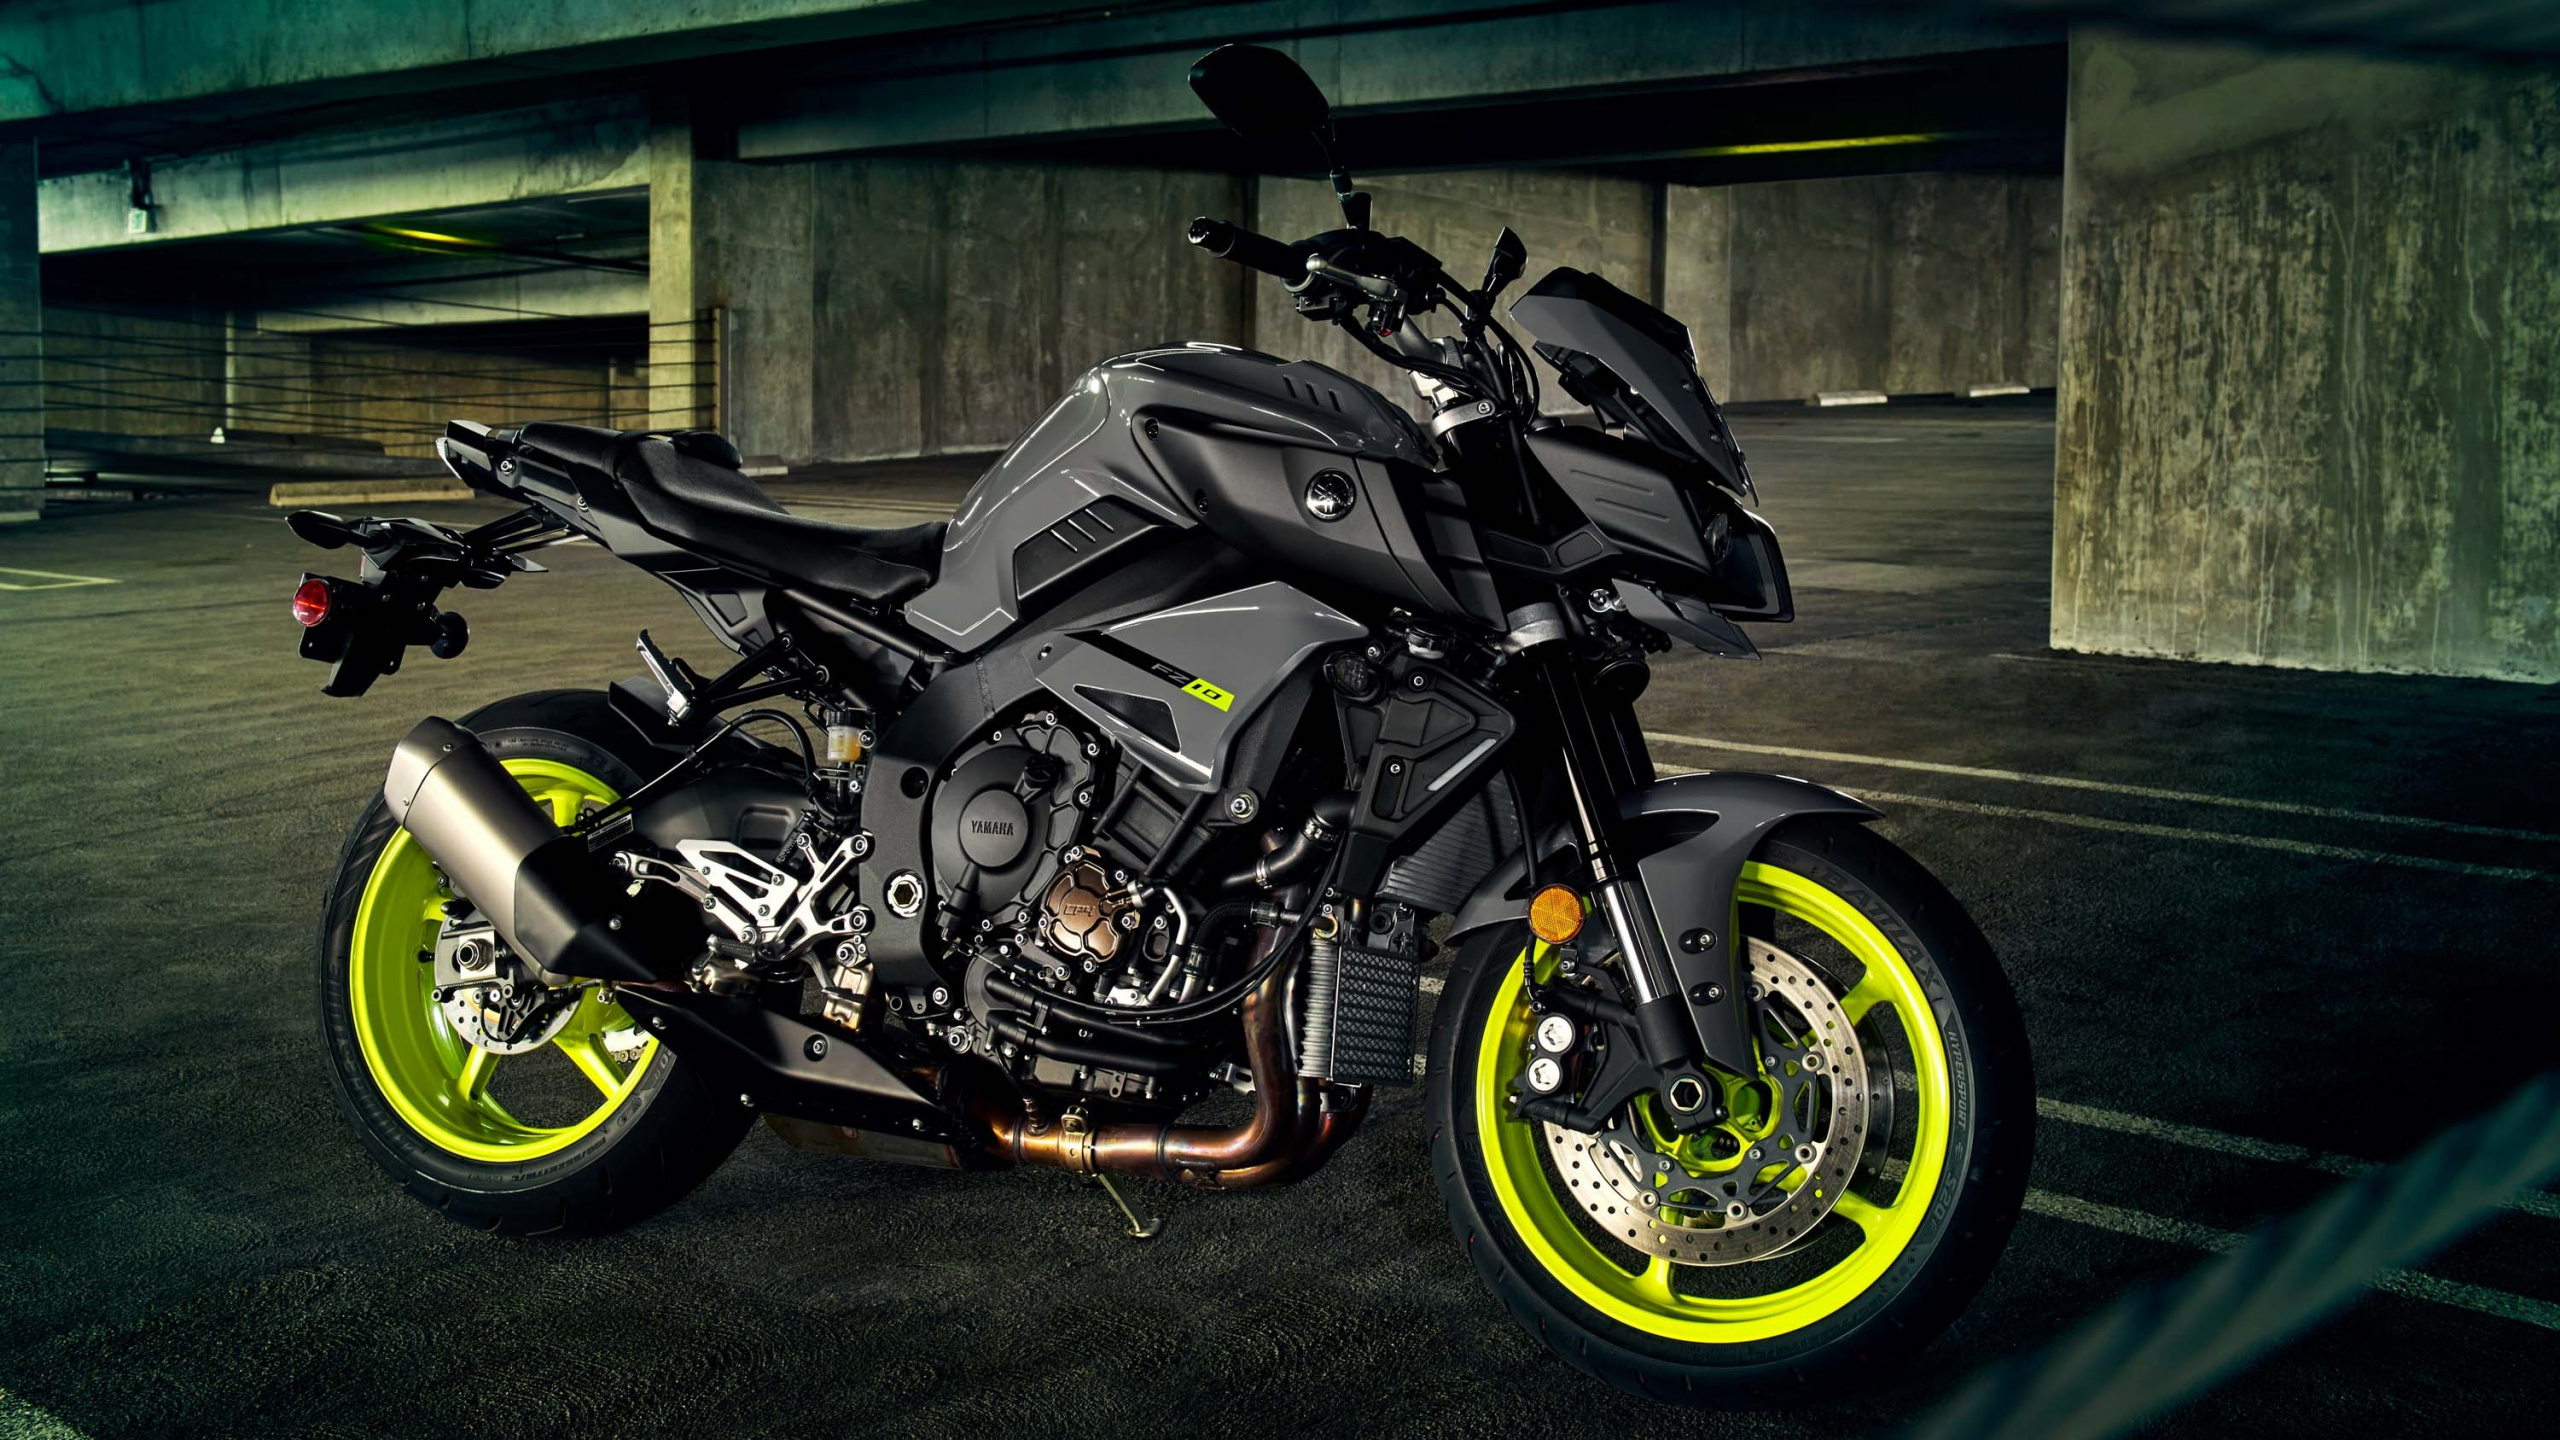 Black and Gray Sports Bike Parked on Gray Concrete Floor. Wallpaper in 2560x1440 Resolution